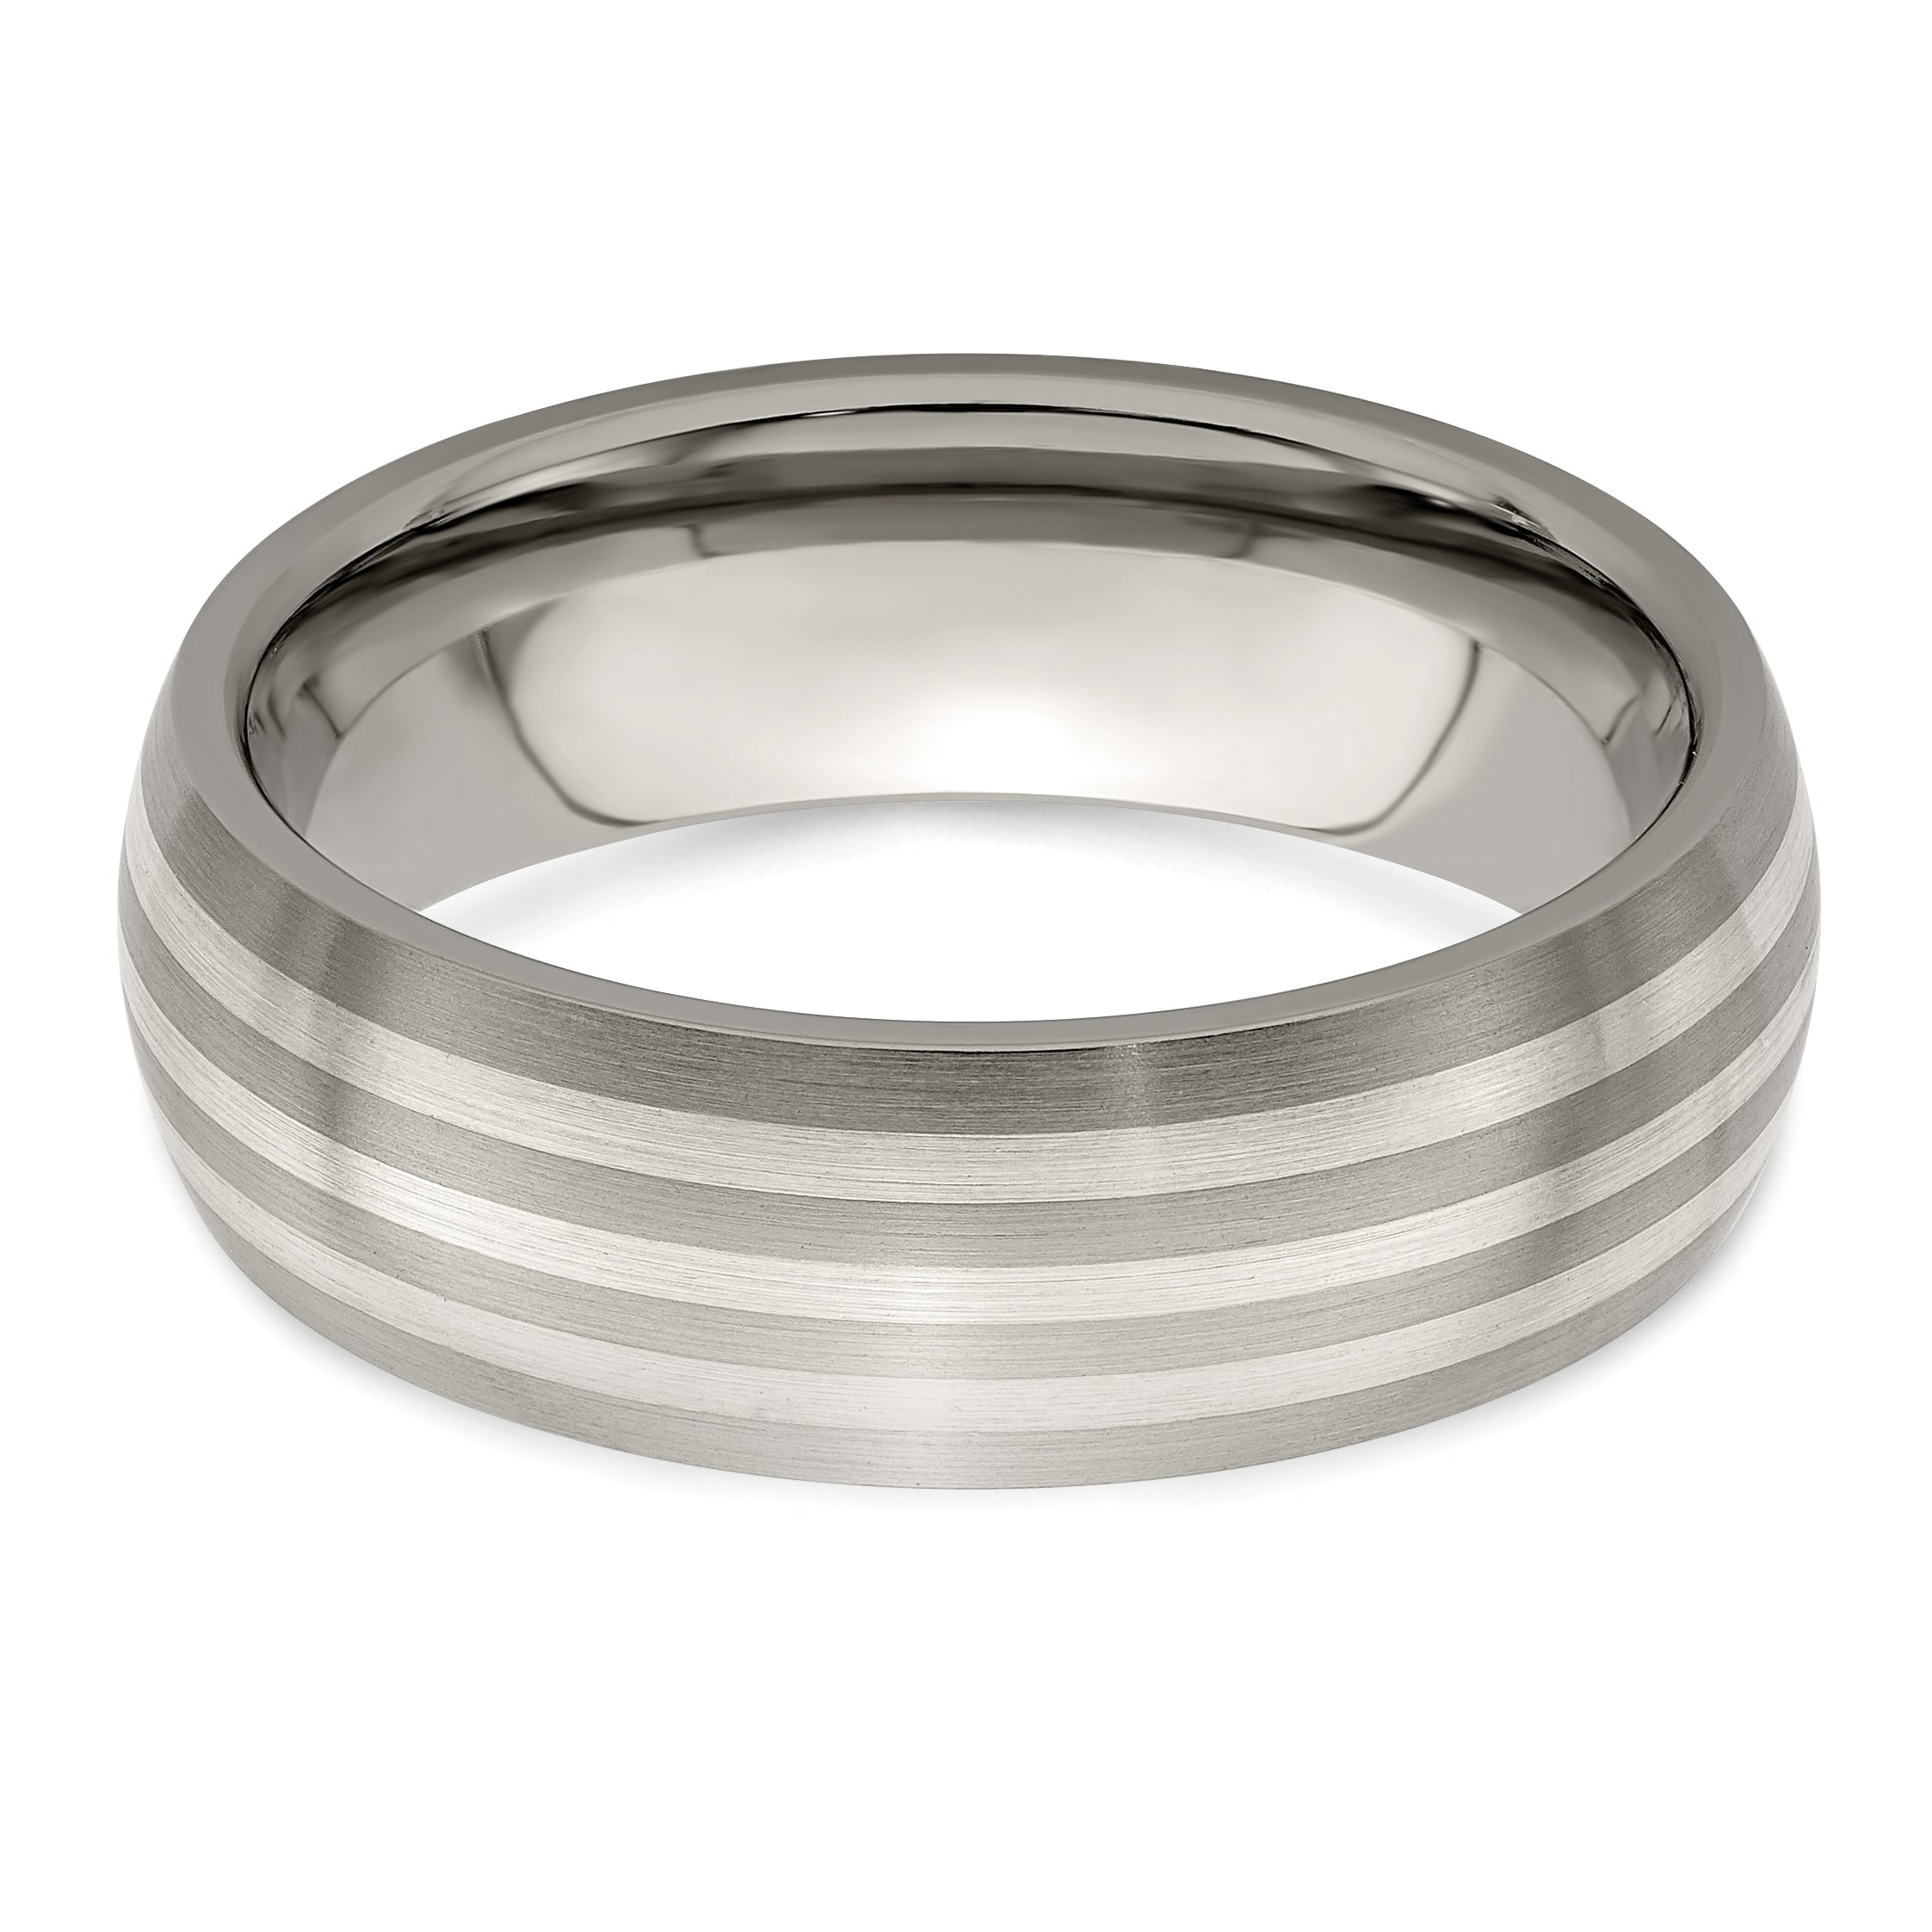 Edward Mirell Titanium with Sterling Silver Inlay Brushed 7mm Band